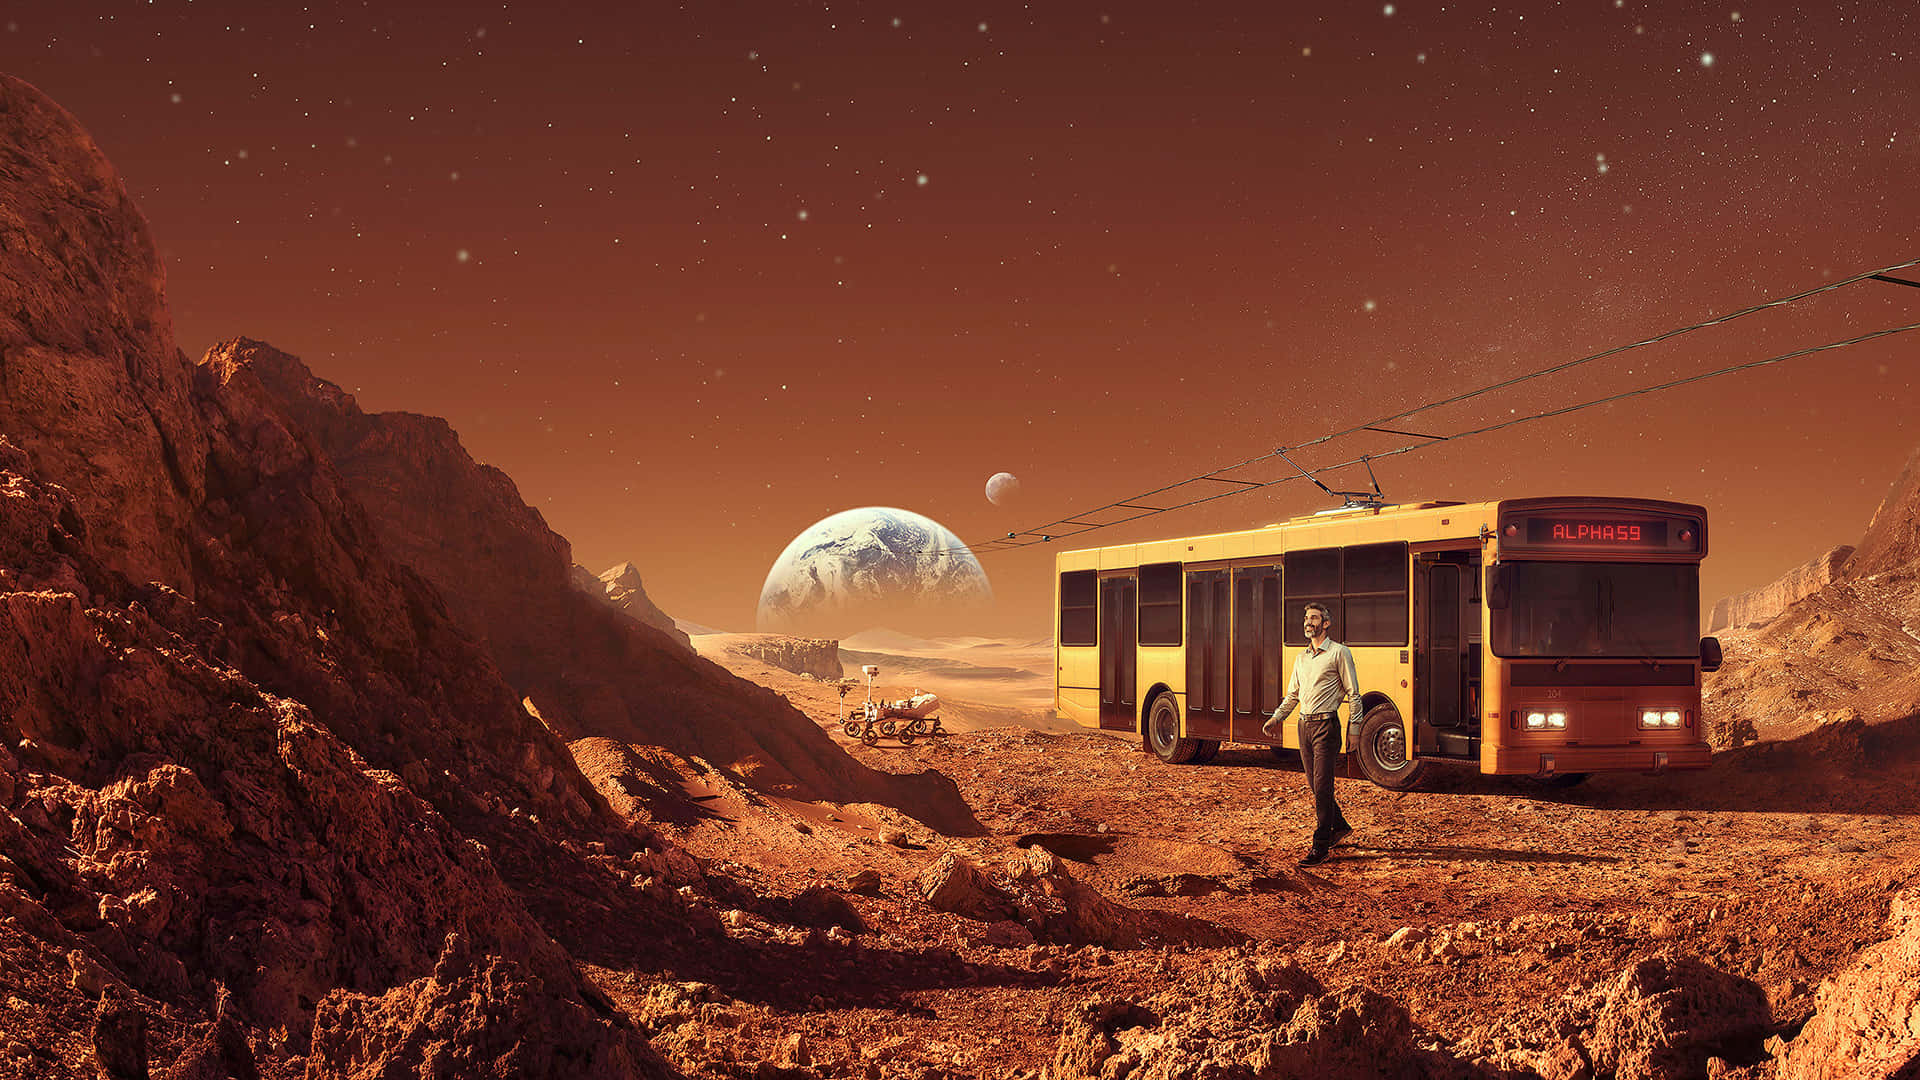 Bus On Mars Pictures